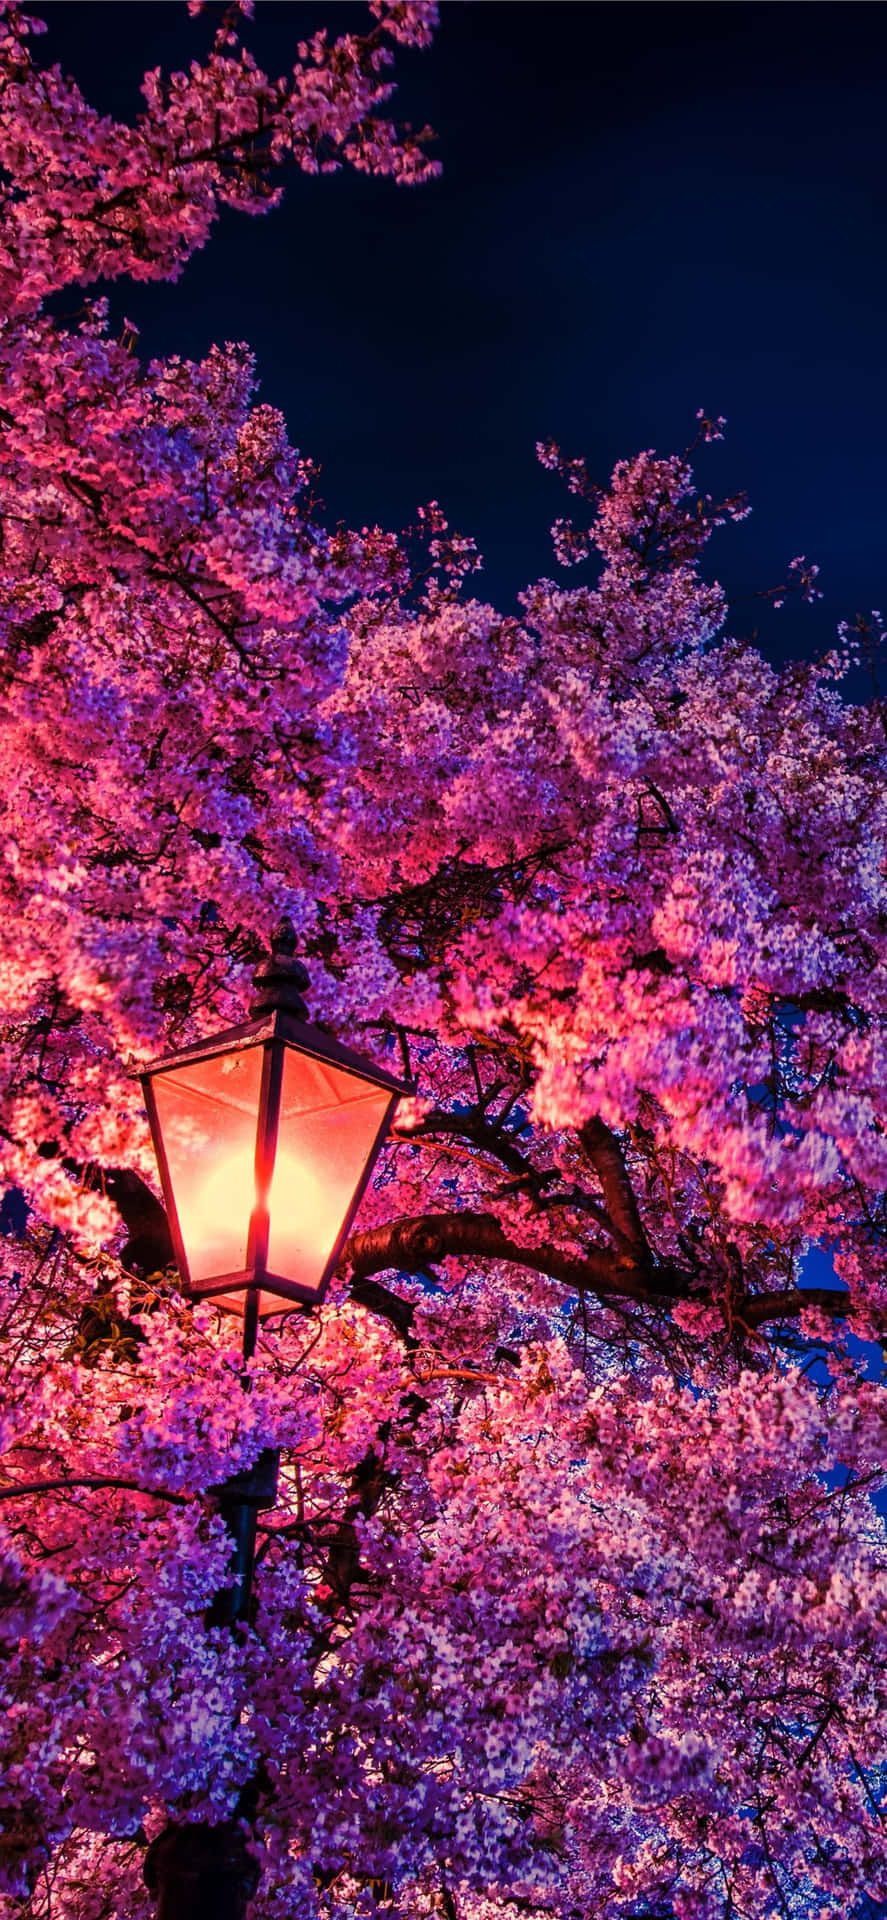 IPhone wallpaper of a cherry blossom tree with a street lamp in the middle of it - Cherry blossom